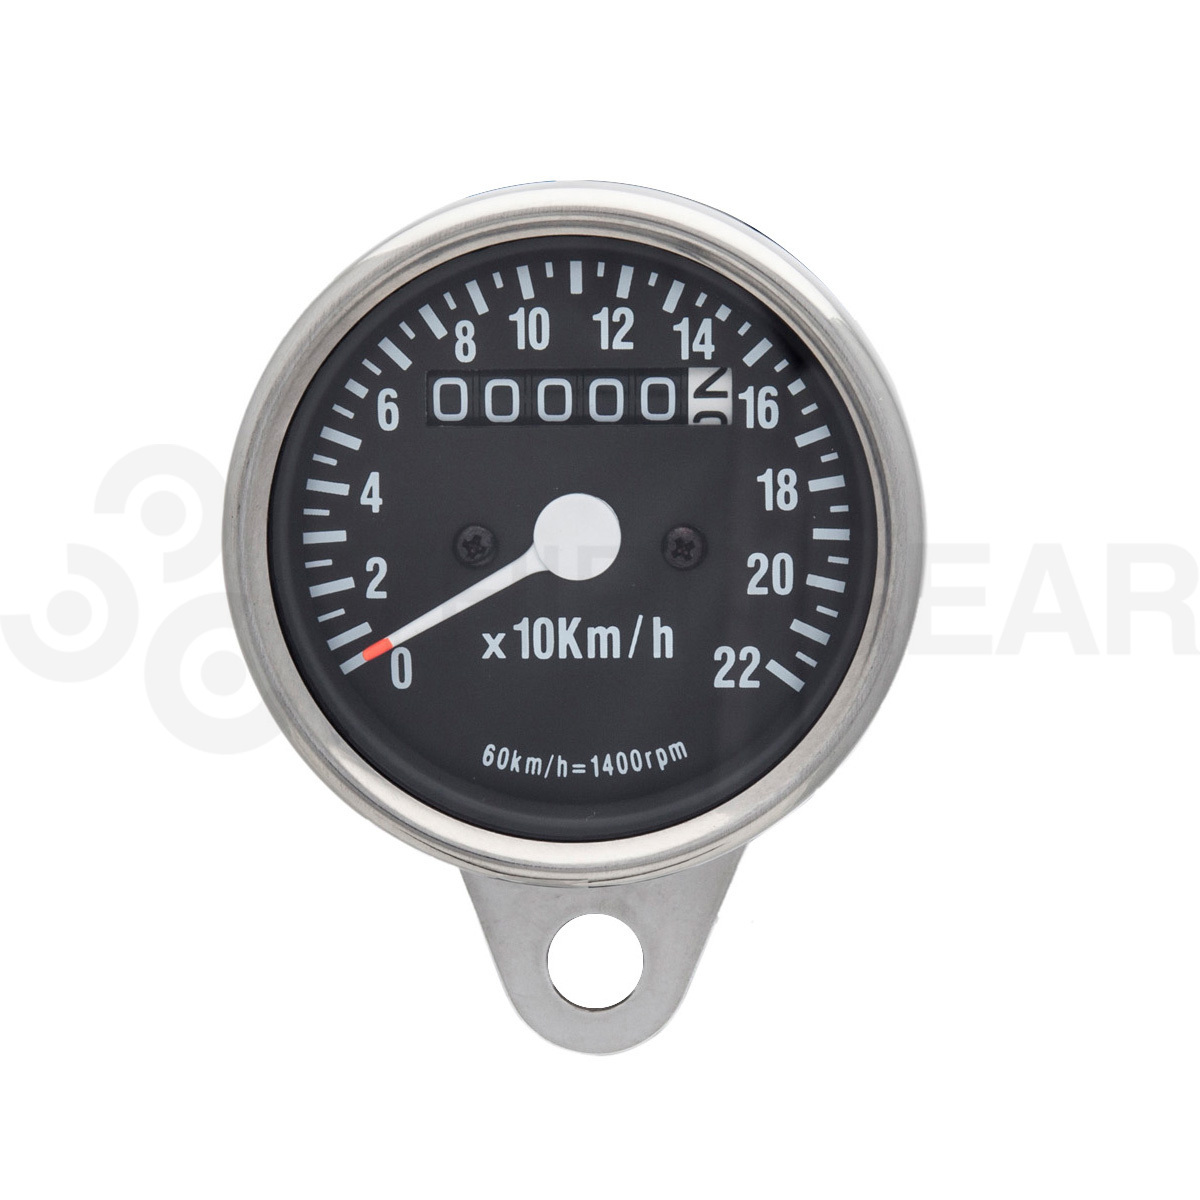 YIBO Motorcycle Cafe Racer Speedometer Odometer Gauge 0-160km/h Instrument with LED Indicator 